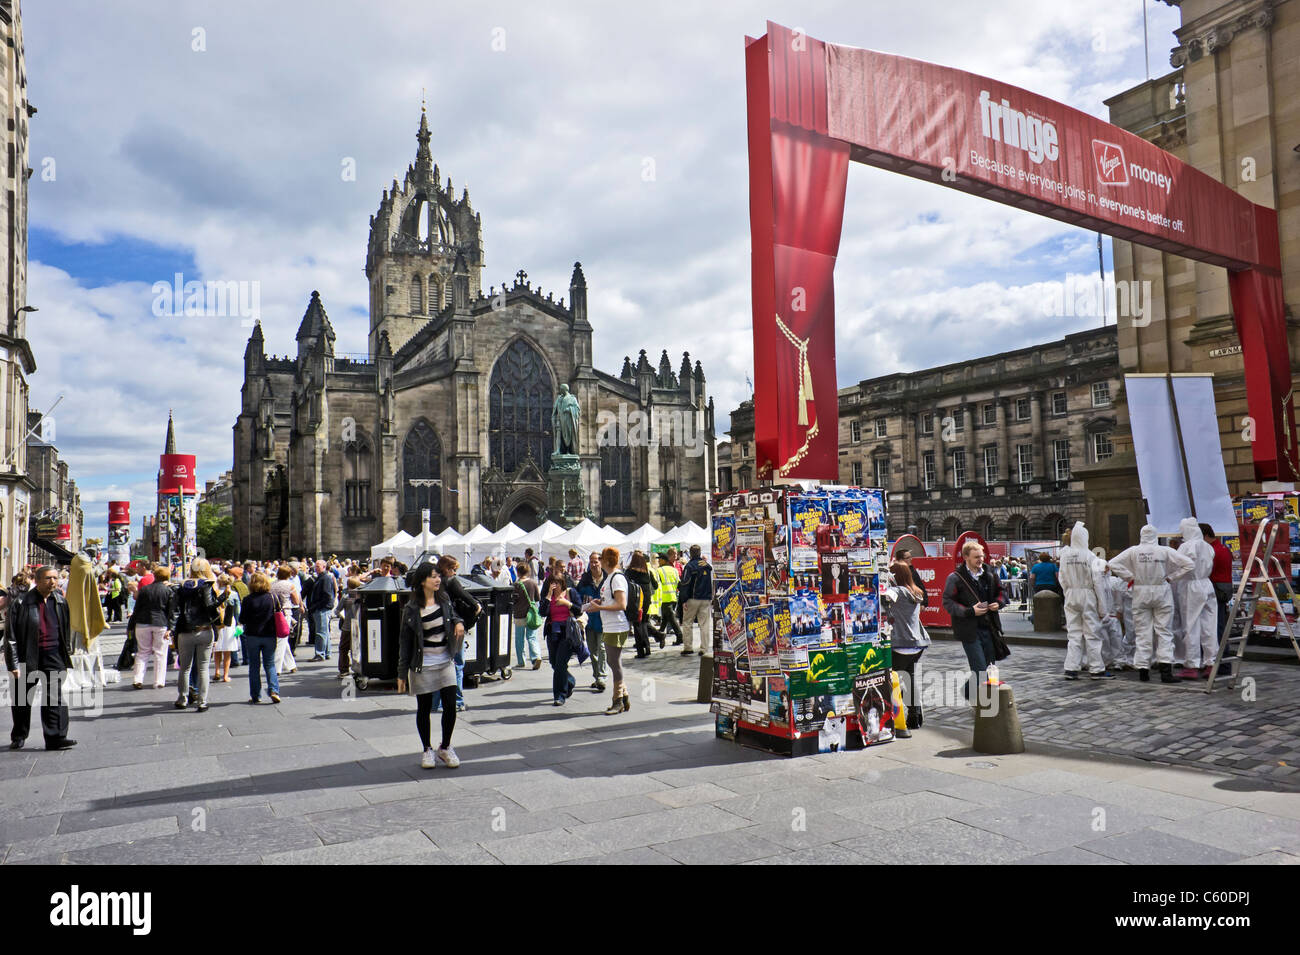 The West entrance to the Royal Mile Edinburgh Fringe Festival area with displays tents and shows with St. Giles Cathedral behind Stock Photo